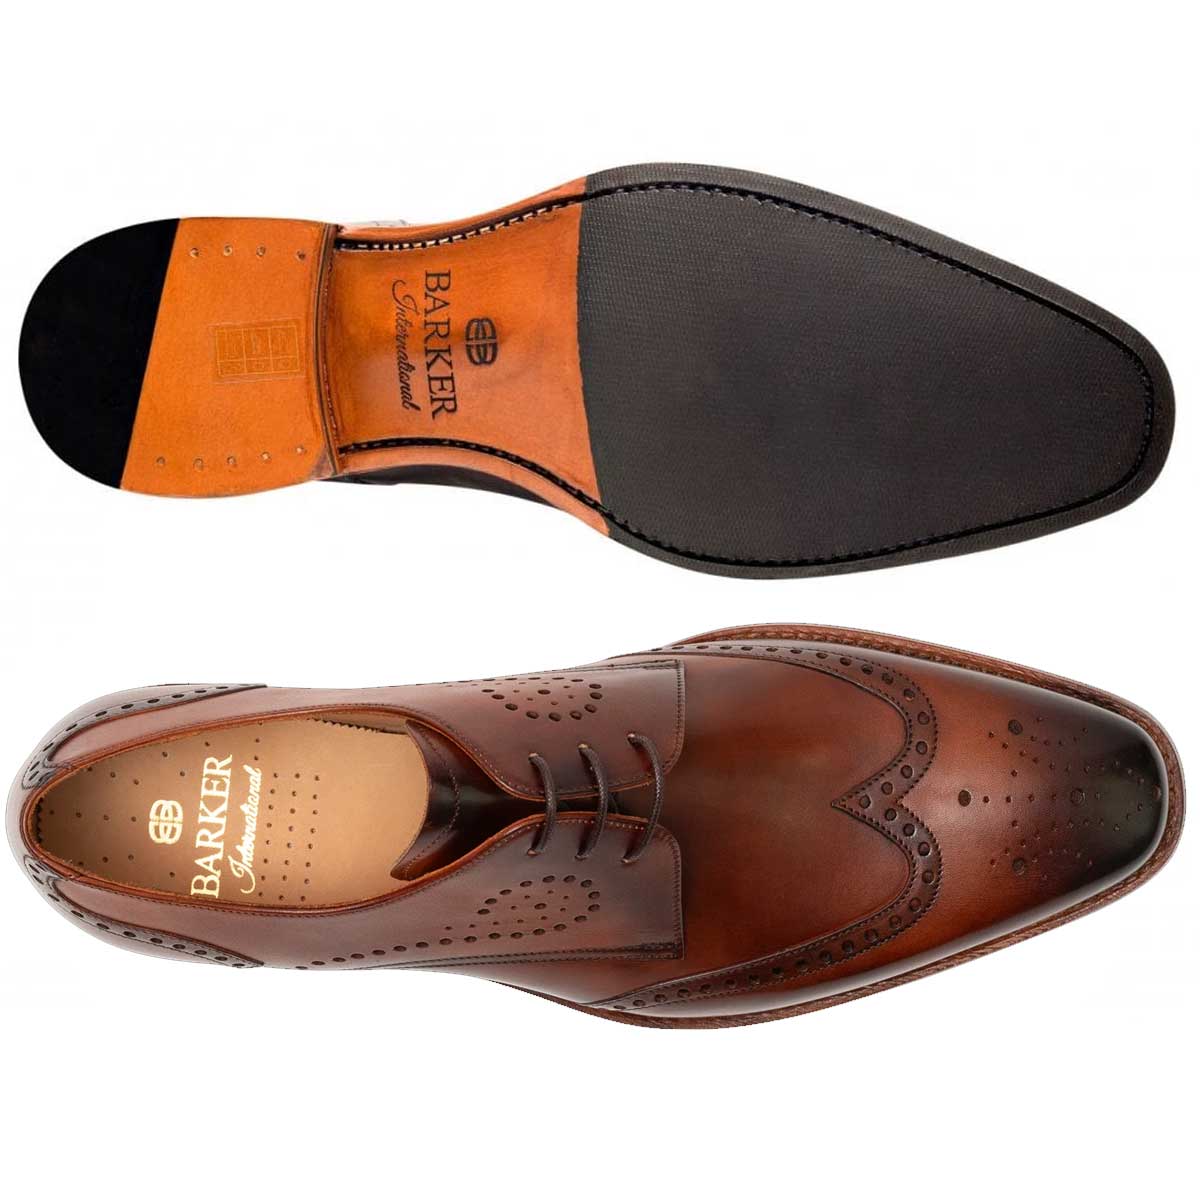 BARKER George Shoes - Mens - Brown Hand Patina